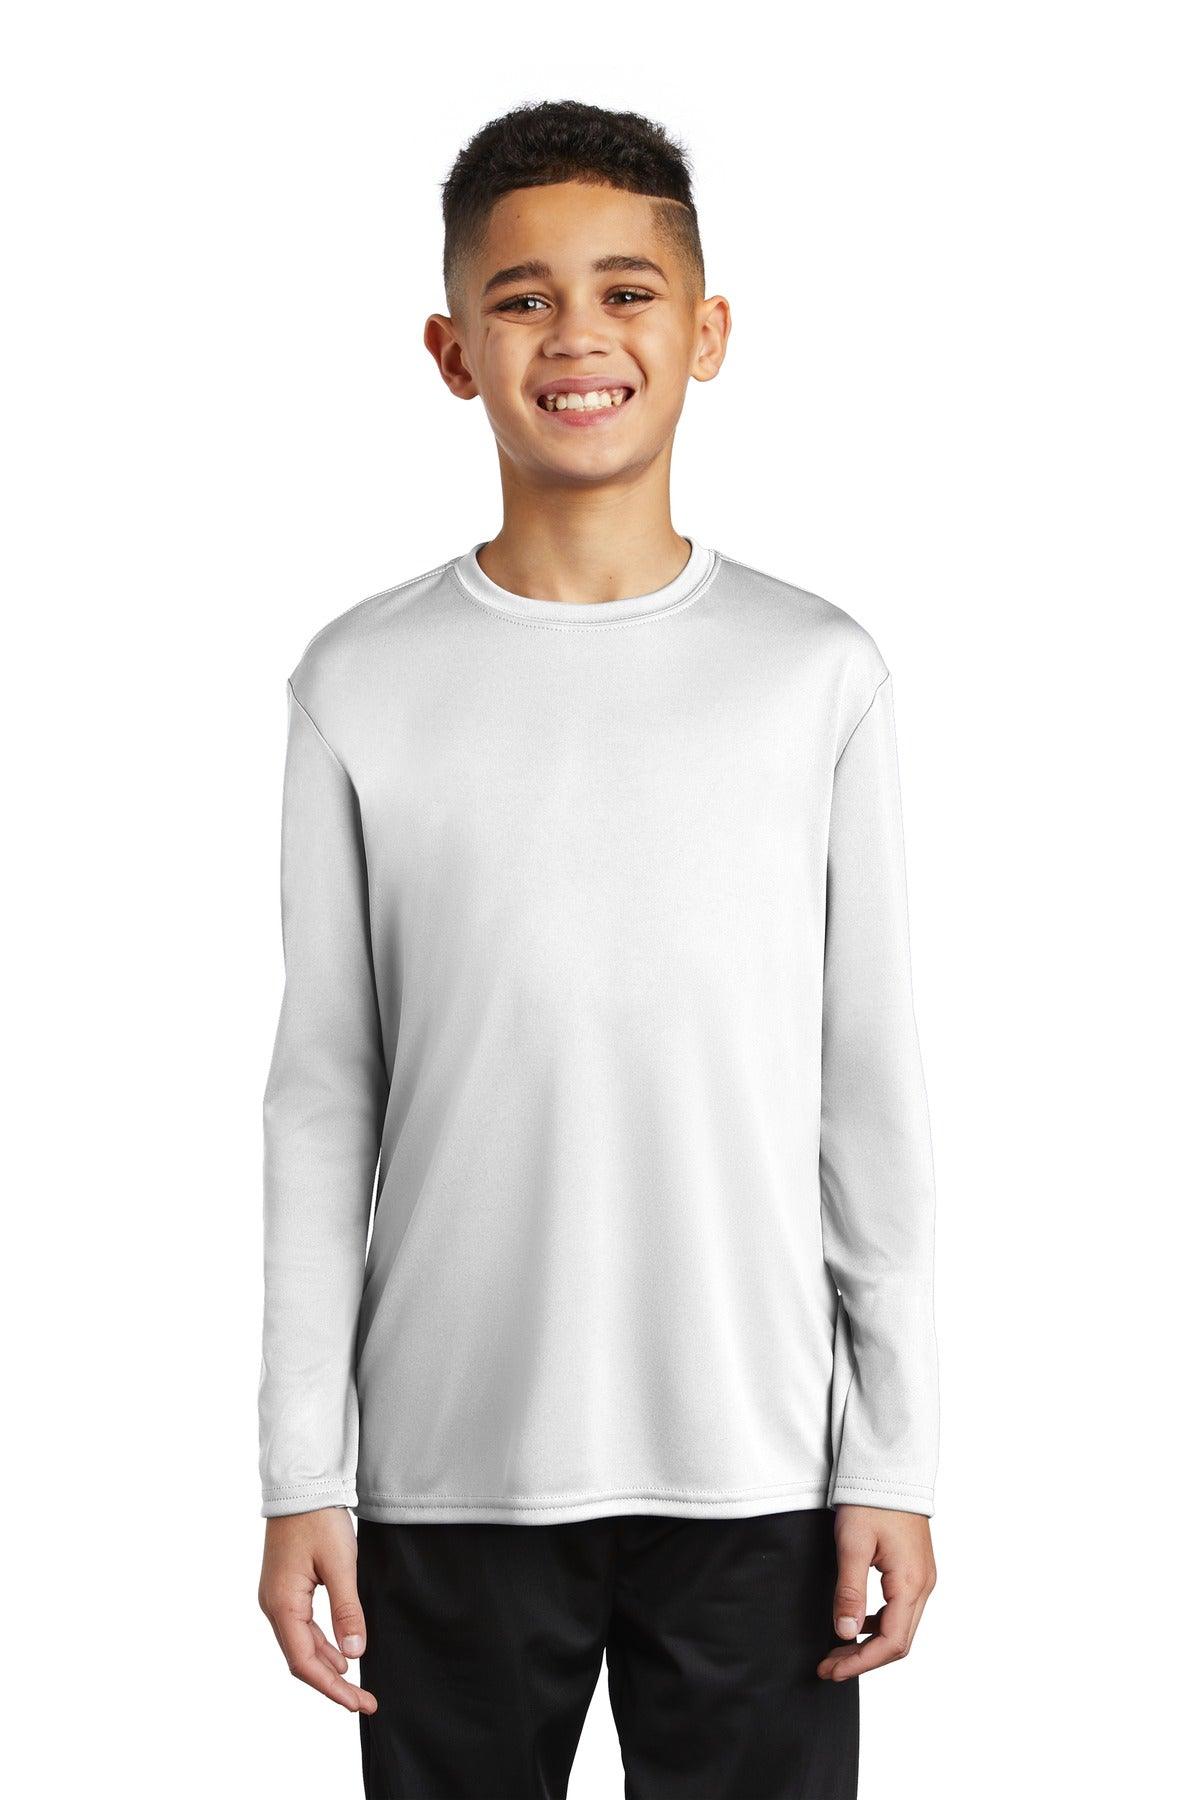 Port & Company Youth Long Sleeve Performance Tee PC380YLS - Dresses Max